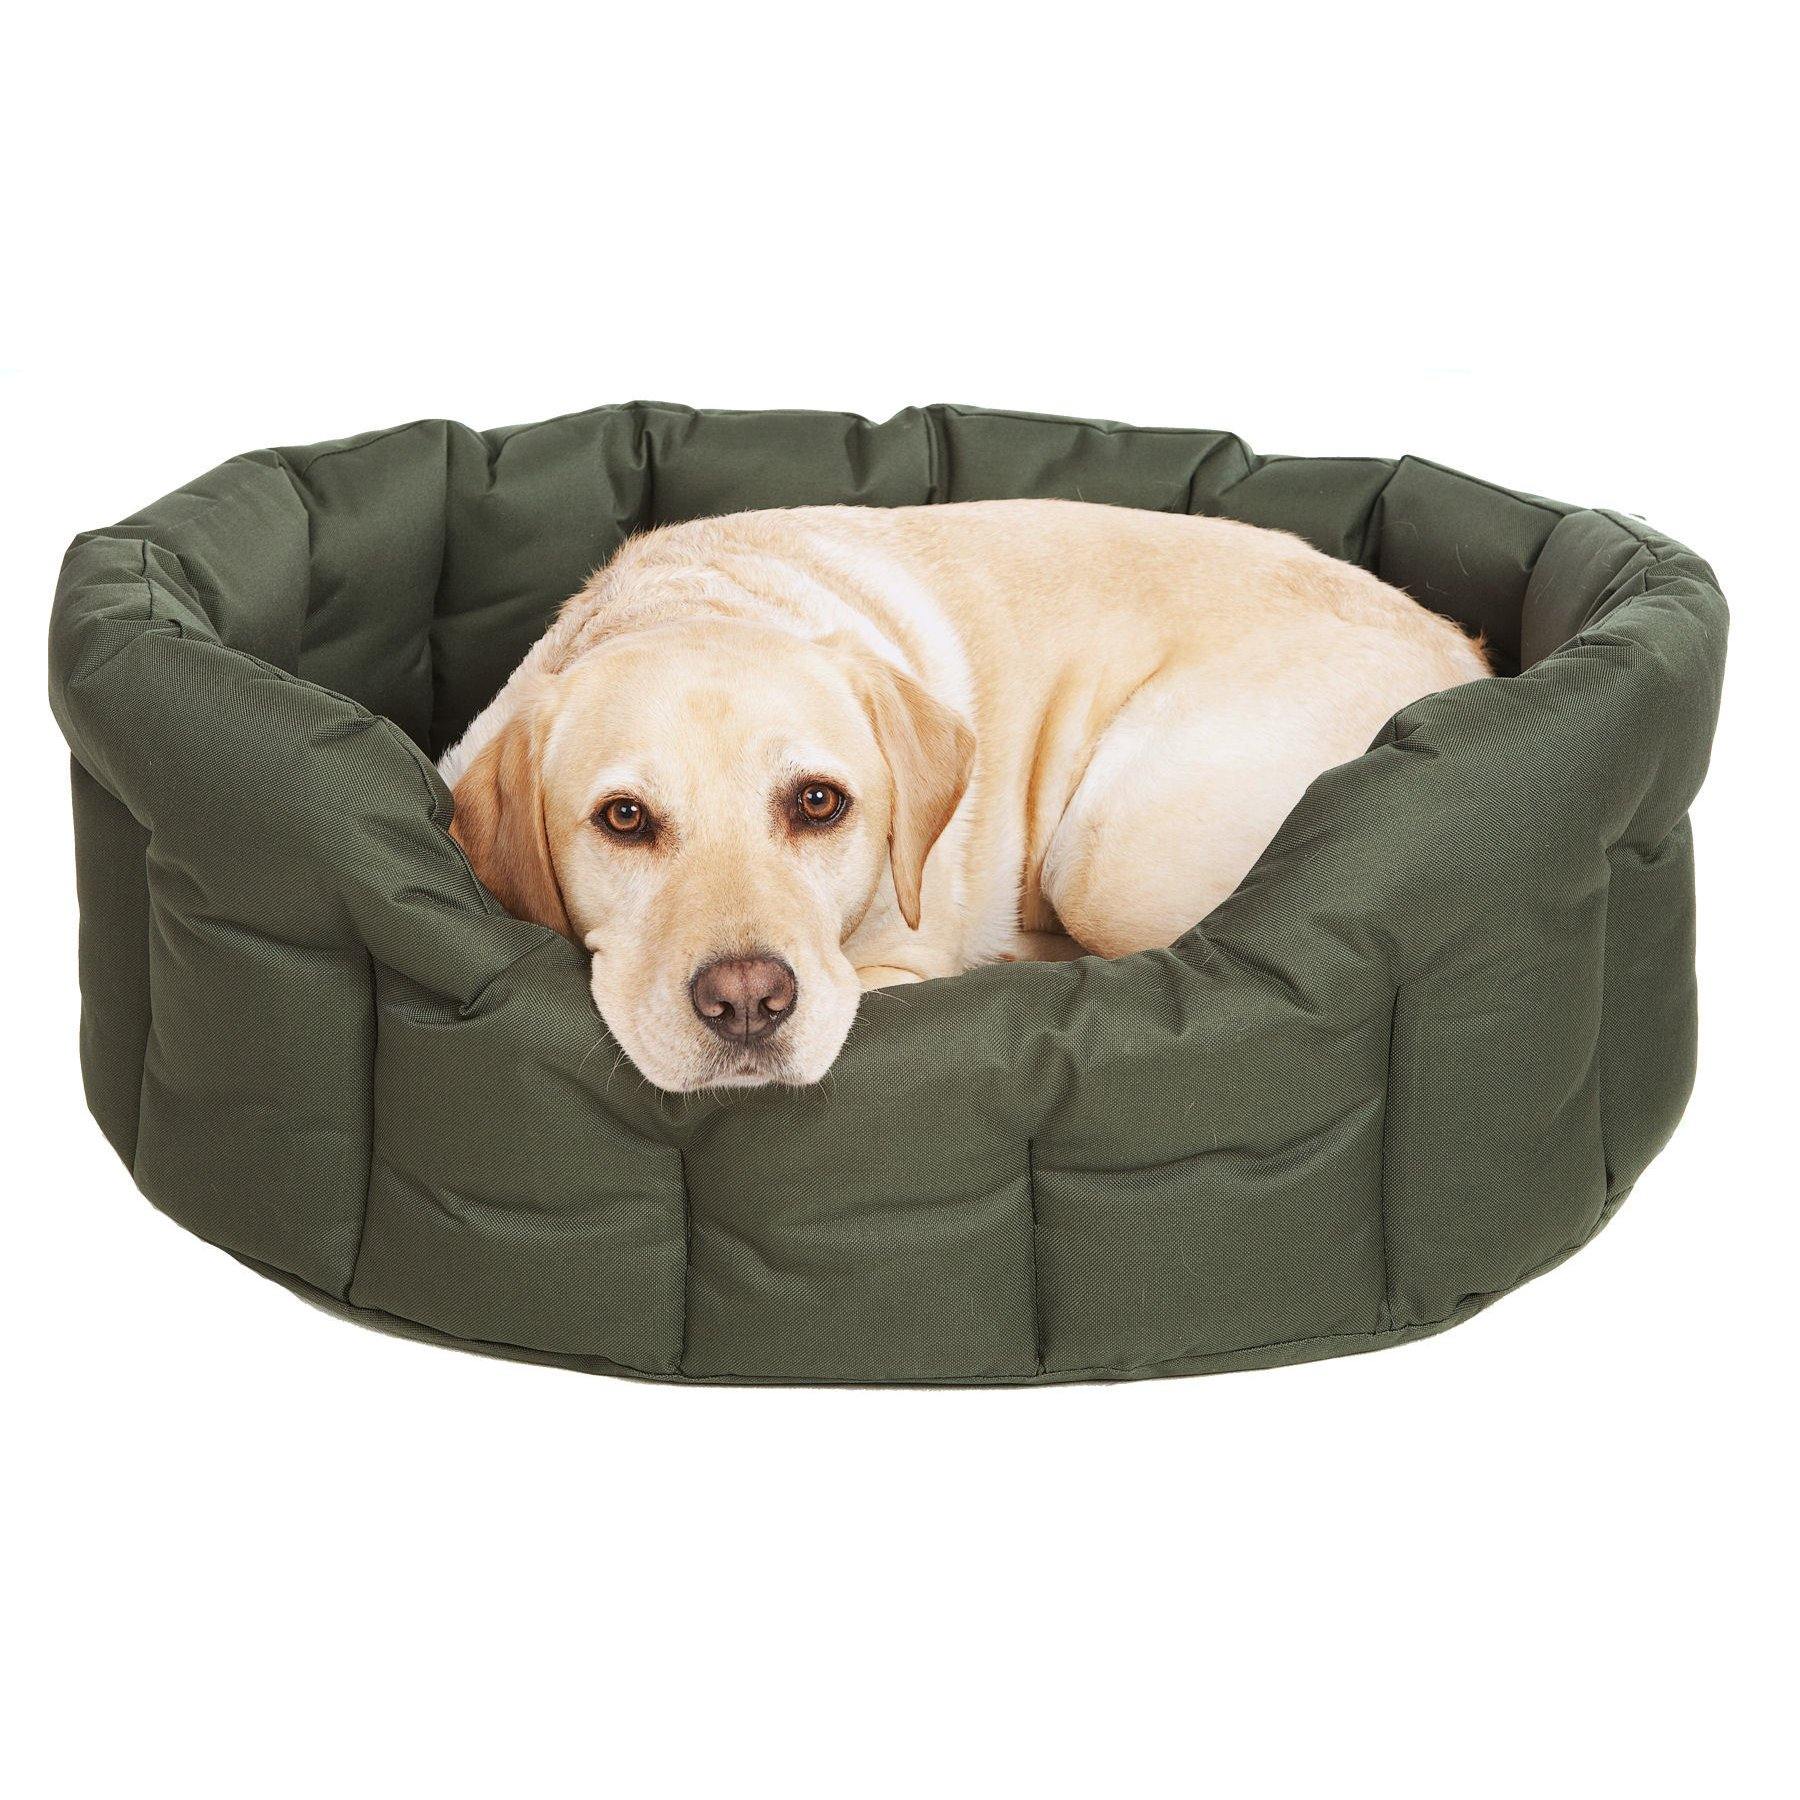 P&L Heavy Duty Oval Waterproof Dog Bed - Dog Bed Outlet